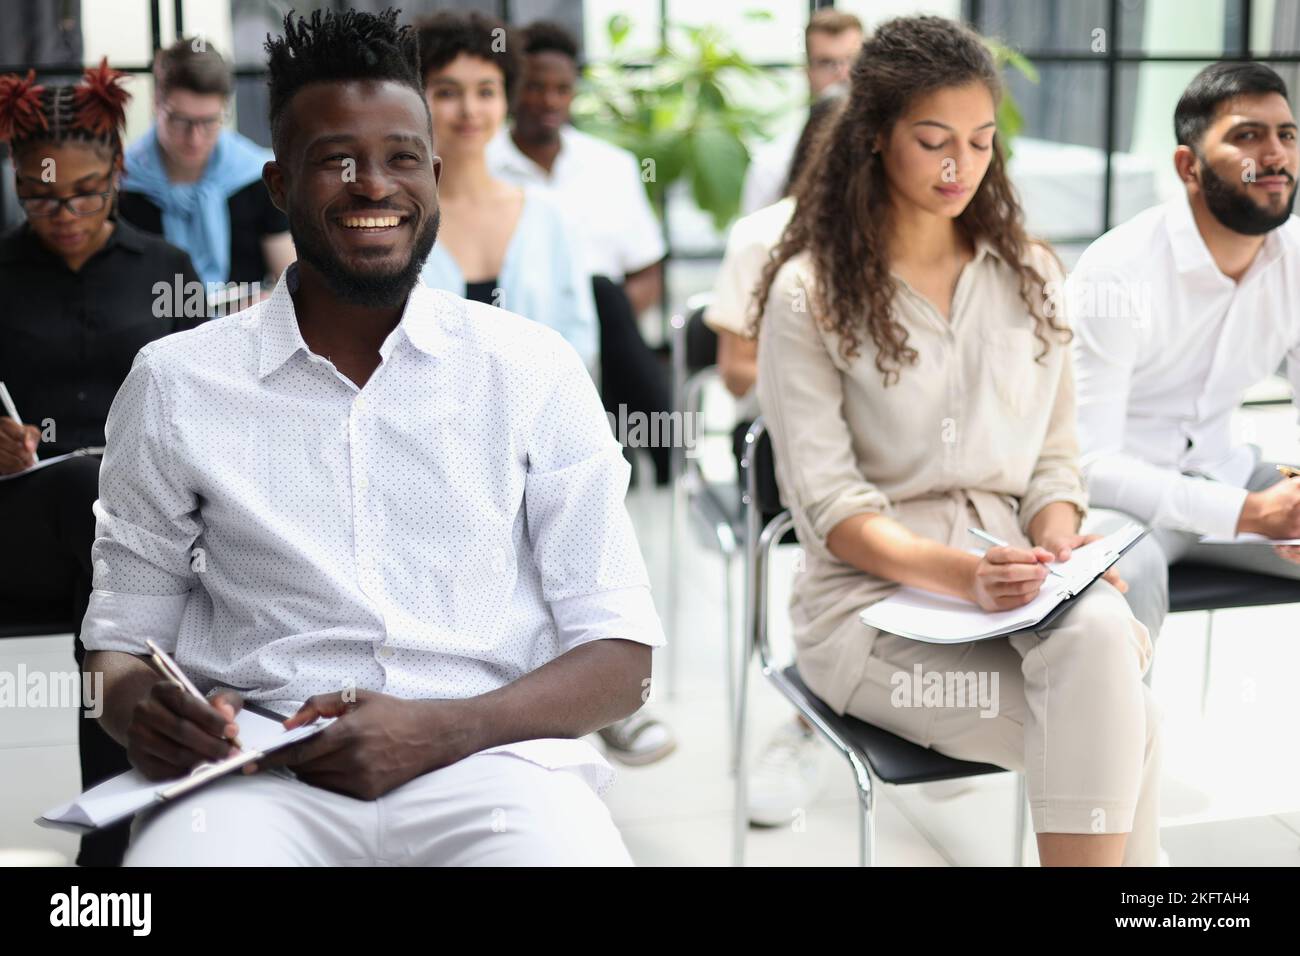 Audience at the conference hall. Business and Entrepreneurship concept. Stock Photo